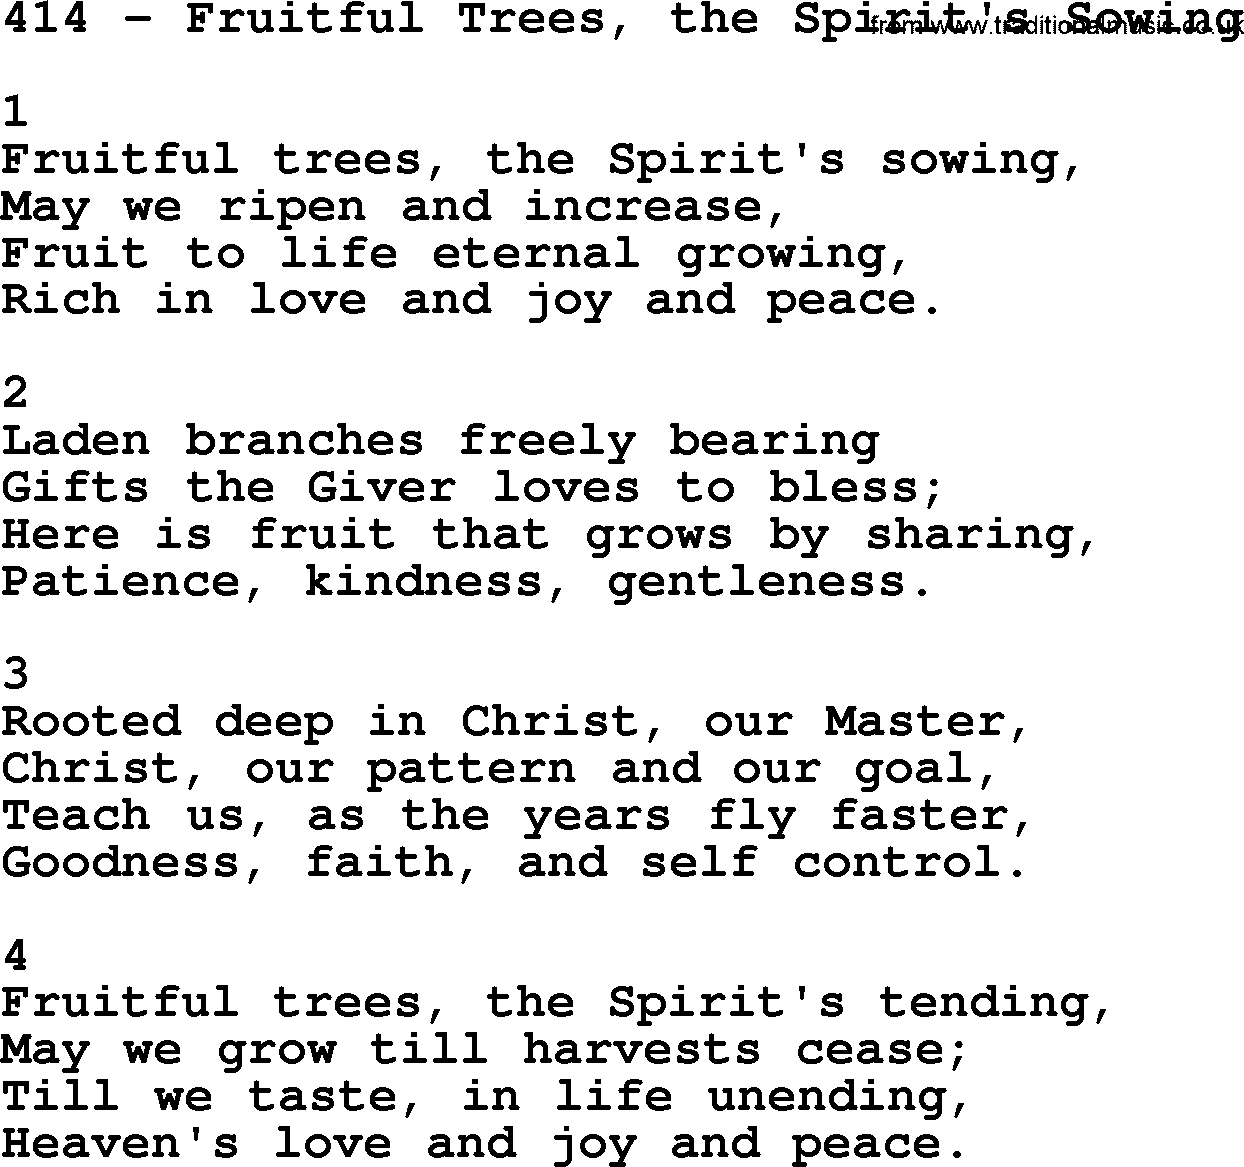 Complete Adventis Hymnal, title: 414-Fruitful Trees, The Spirit's Sowing, with lyrics, midi, mp3, powerpoints(PPT) and PDF,